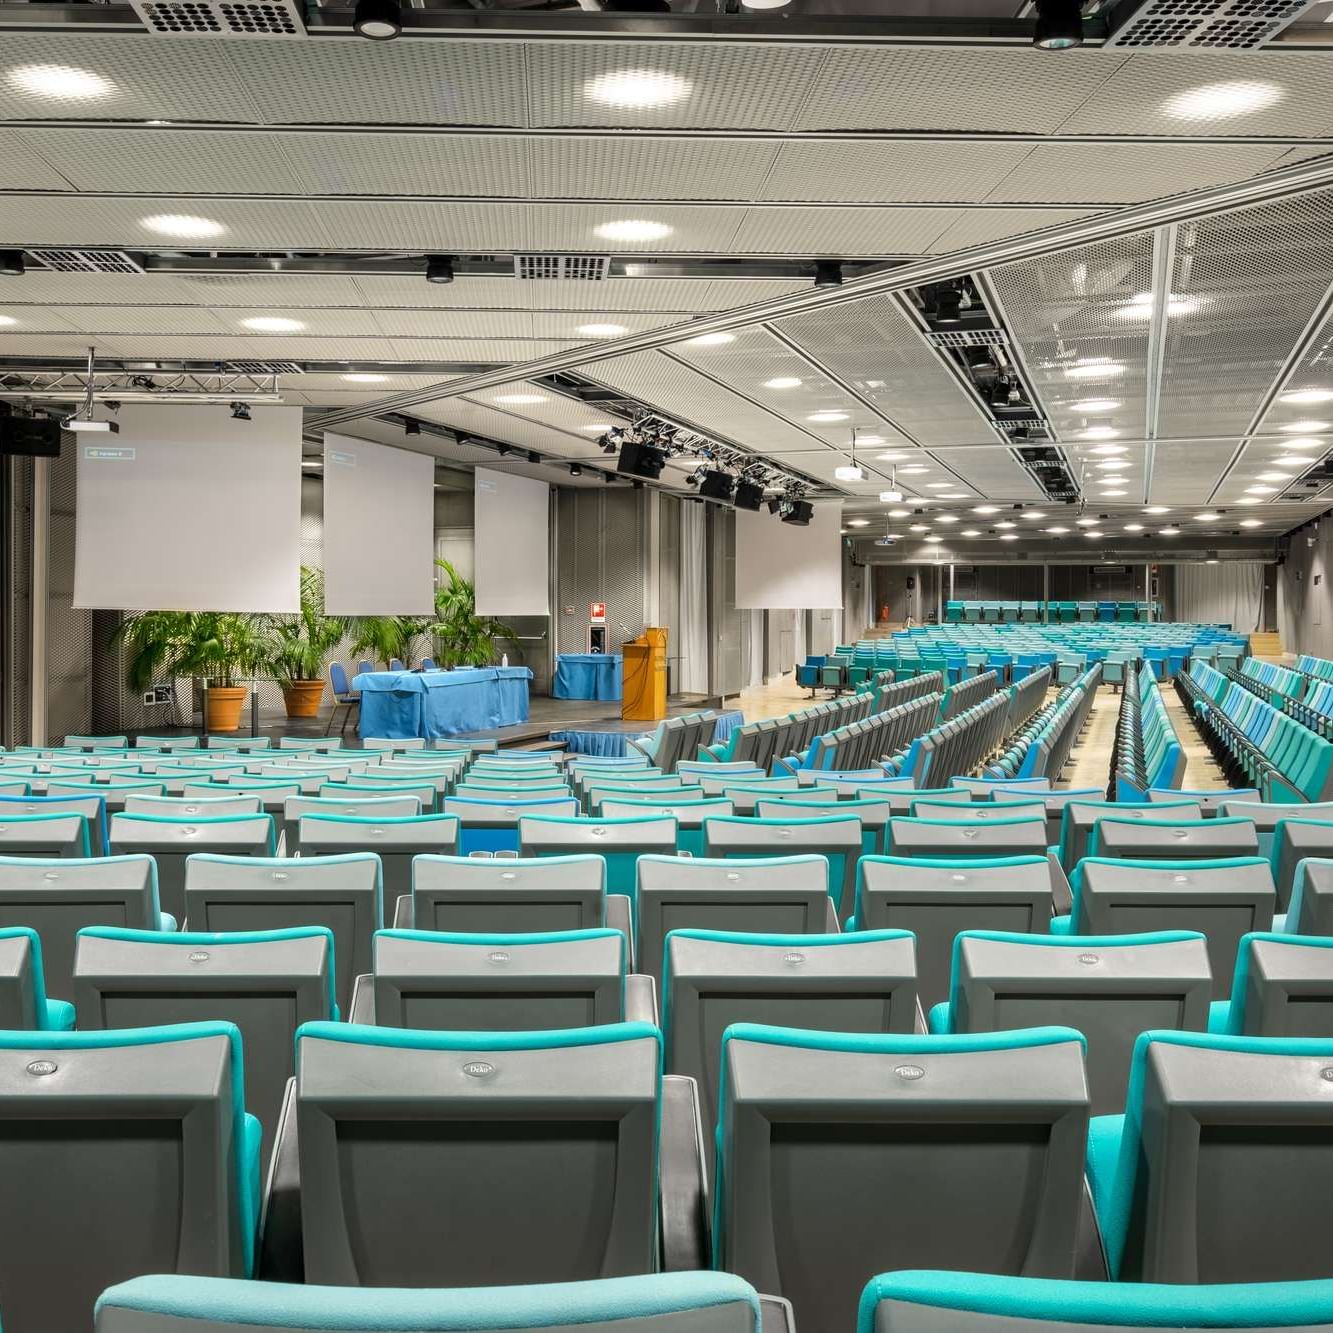 Spacious conference center hosting more than 700 people.